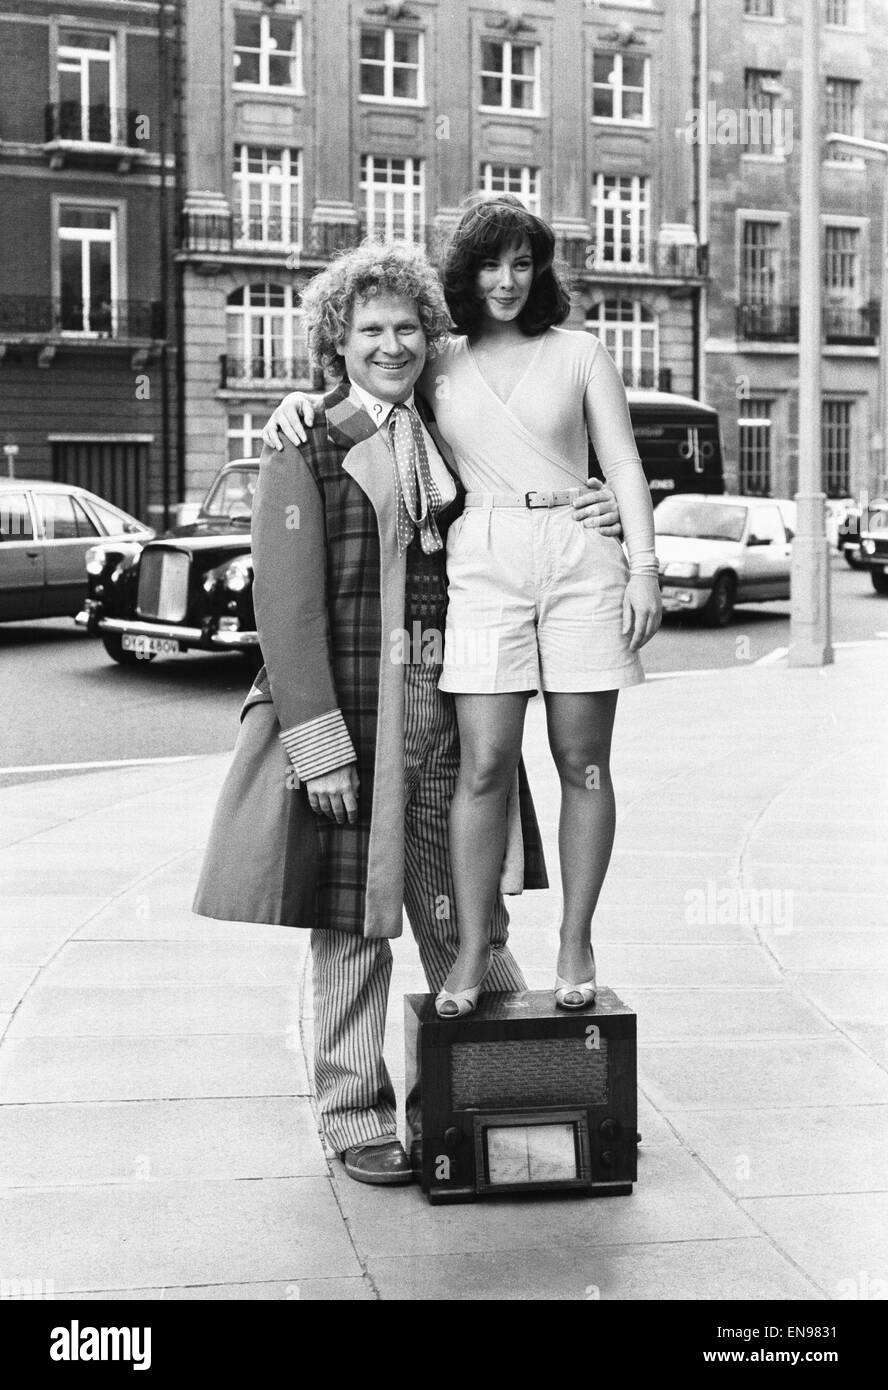 Actor Colin Baker, who plays Doctor Who in the BBC science fiction  programme, photographed with his assistant Nicola Bryant who plays  Perpugilliam "Peri" Brown outside BBC's Broadcasting House. They were at the